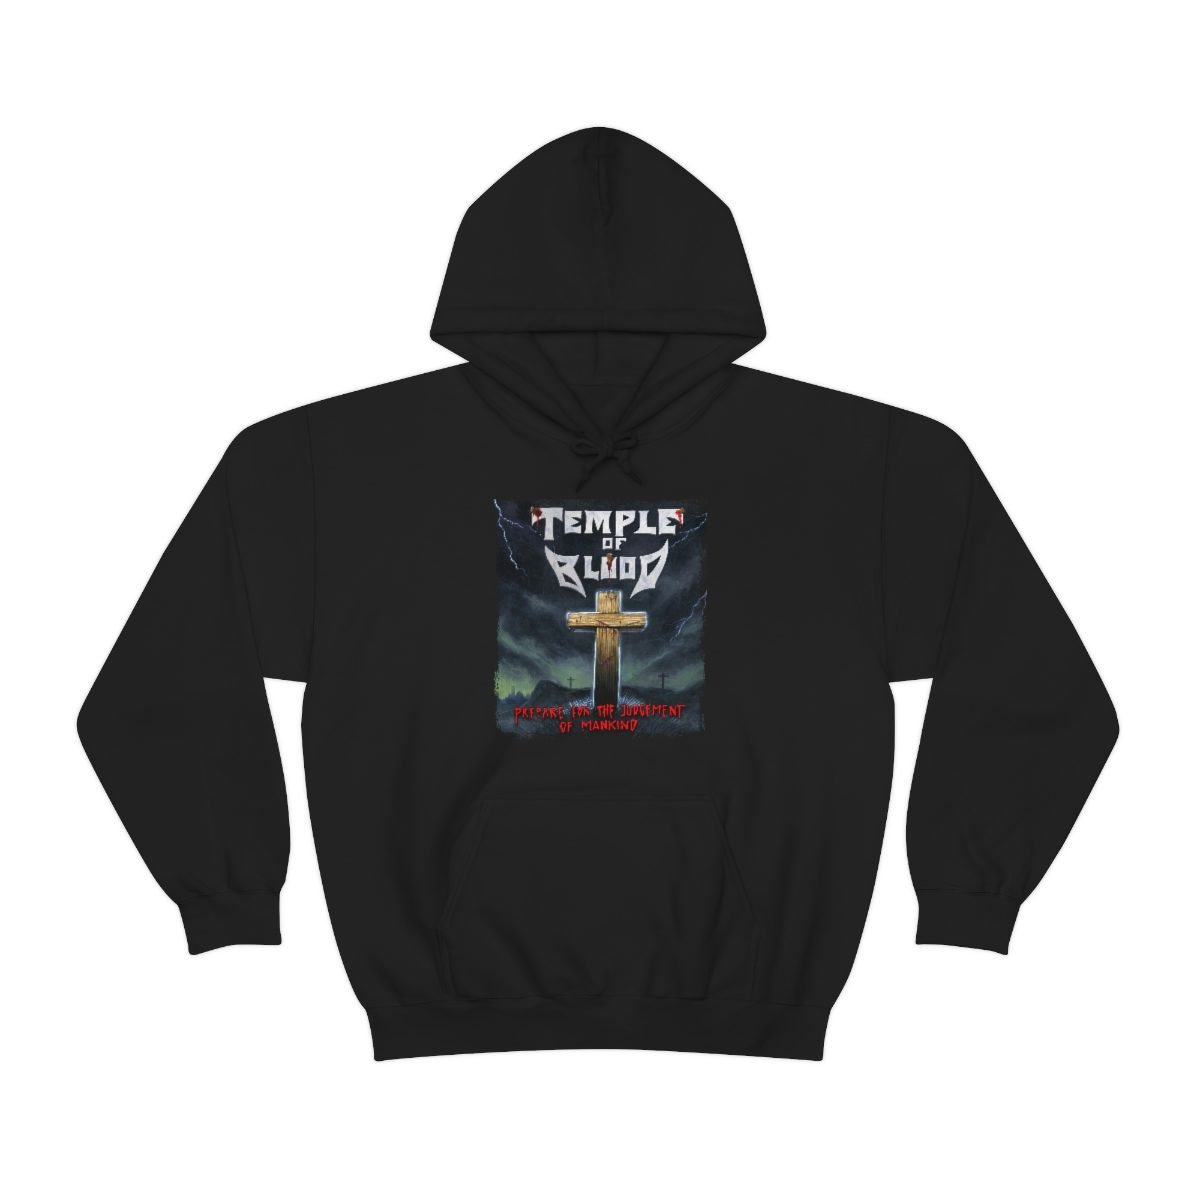 Temple of Blood – Prepare for the Judgment of Mankind Pullover Hooded Sweatshirt